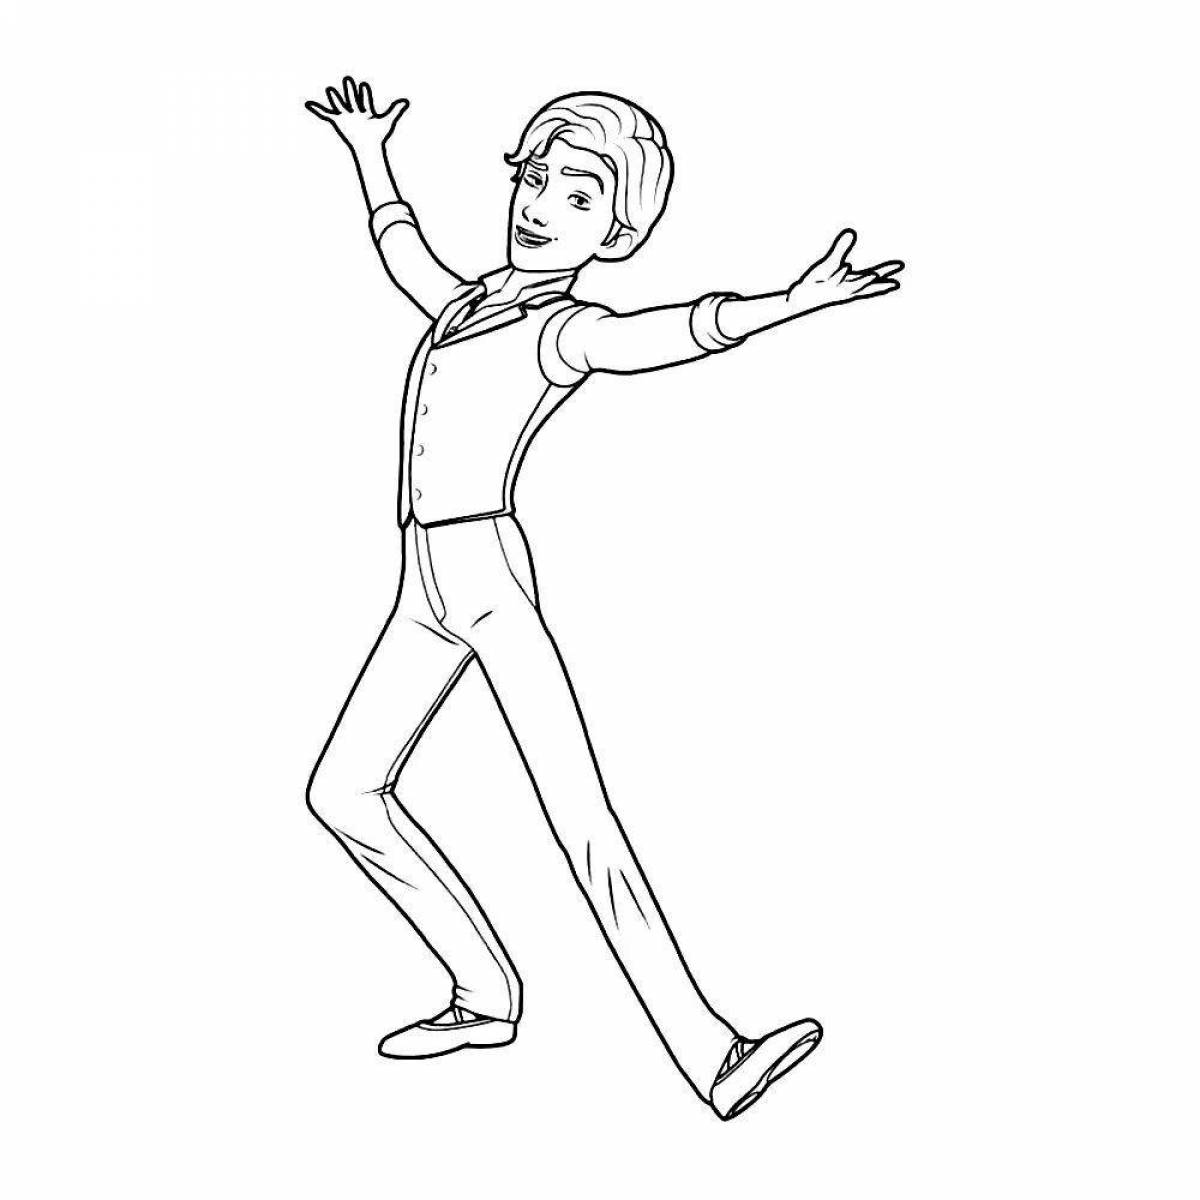 Sports dancer coloring book